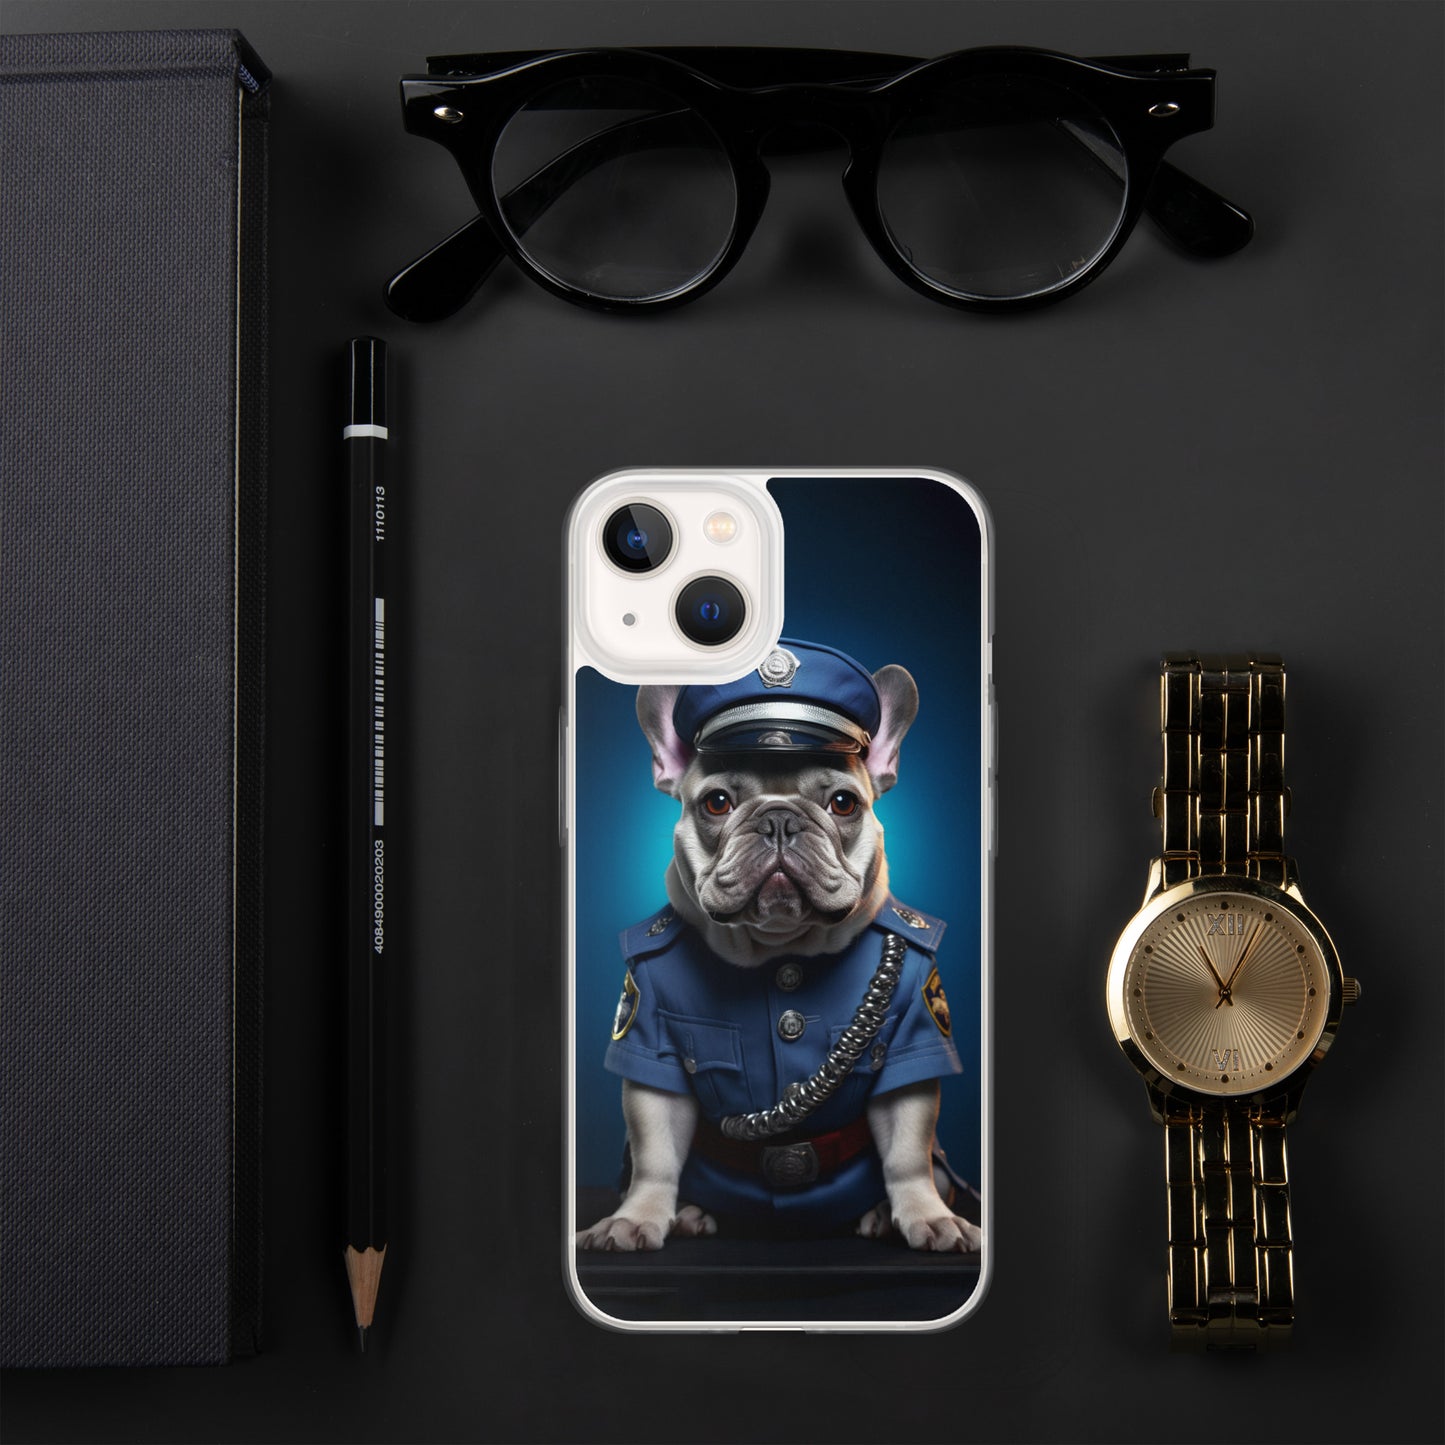 Policeman Frenchie iPhone Case - A Fun and Respectful Choice for Pet Lovers and Law Enforcement Supporters